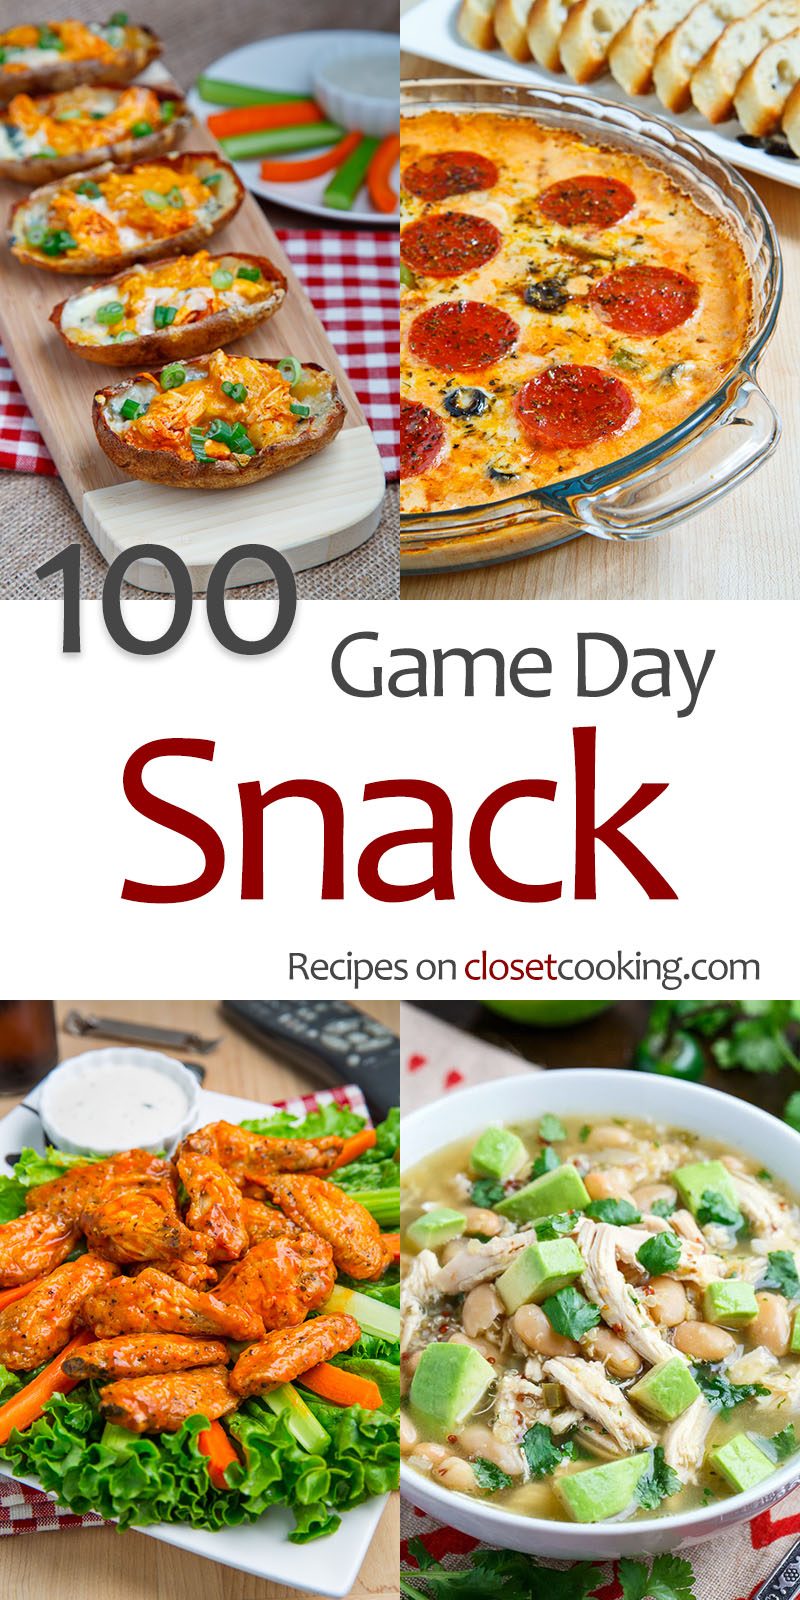 25 Super Bowl Recipes to Make for Game Day